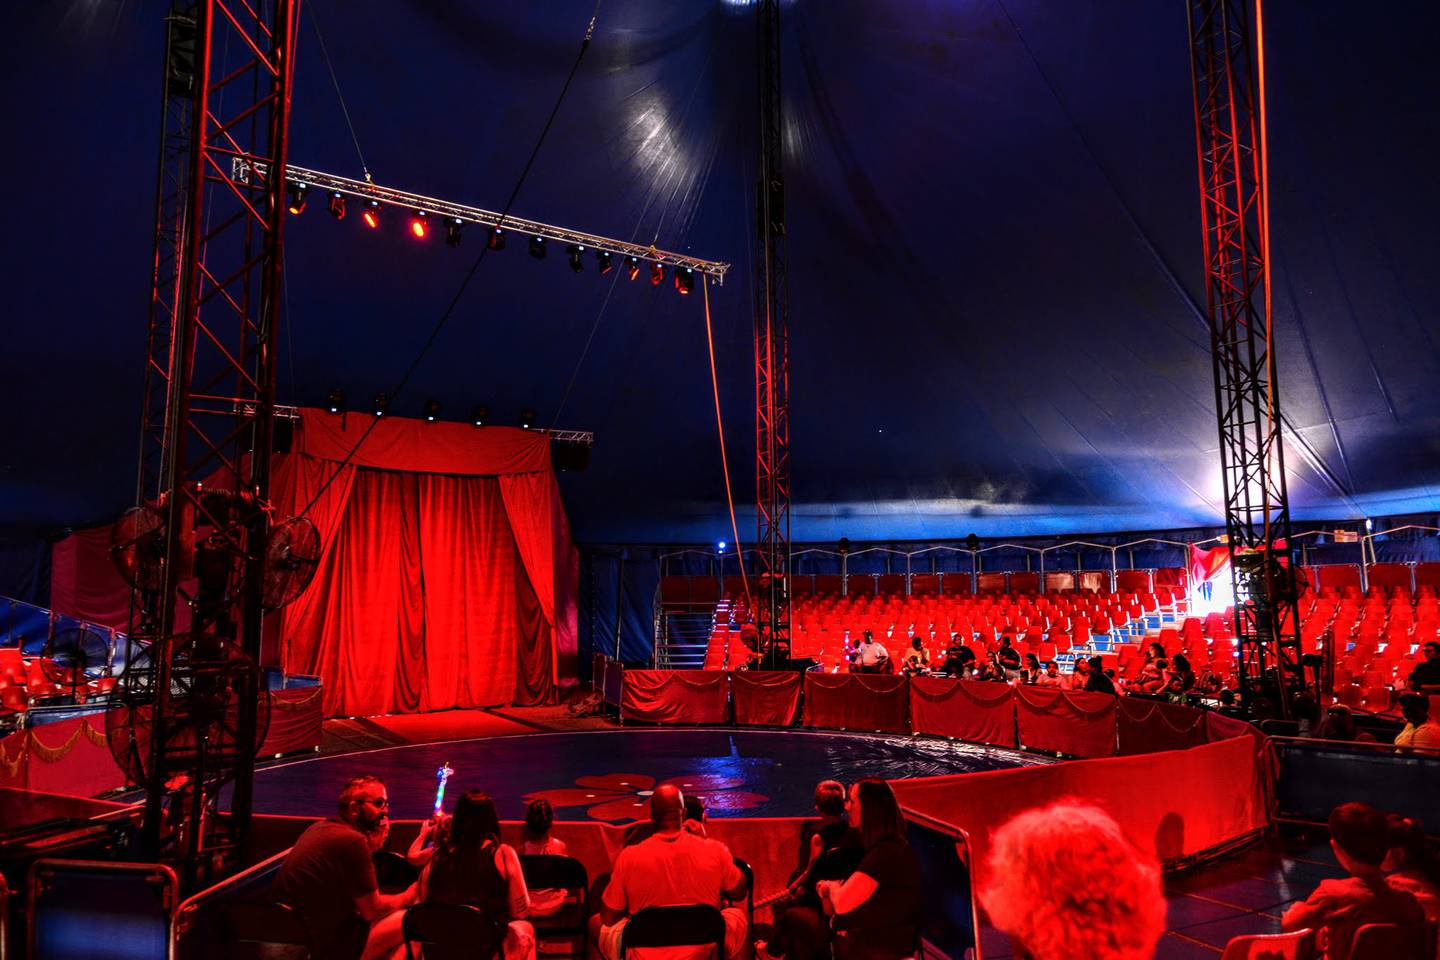 Do Portugal Circus will set up its big top at Westfield Annapolis Friday for a 10 day run of performances of "Cirque."